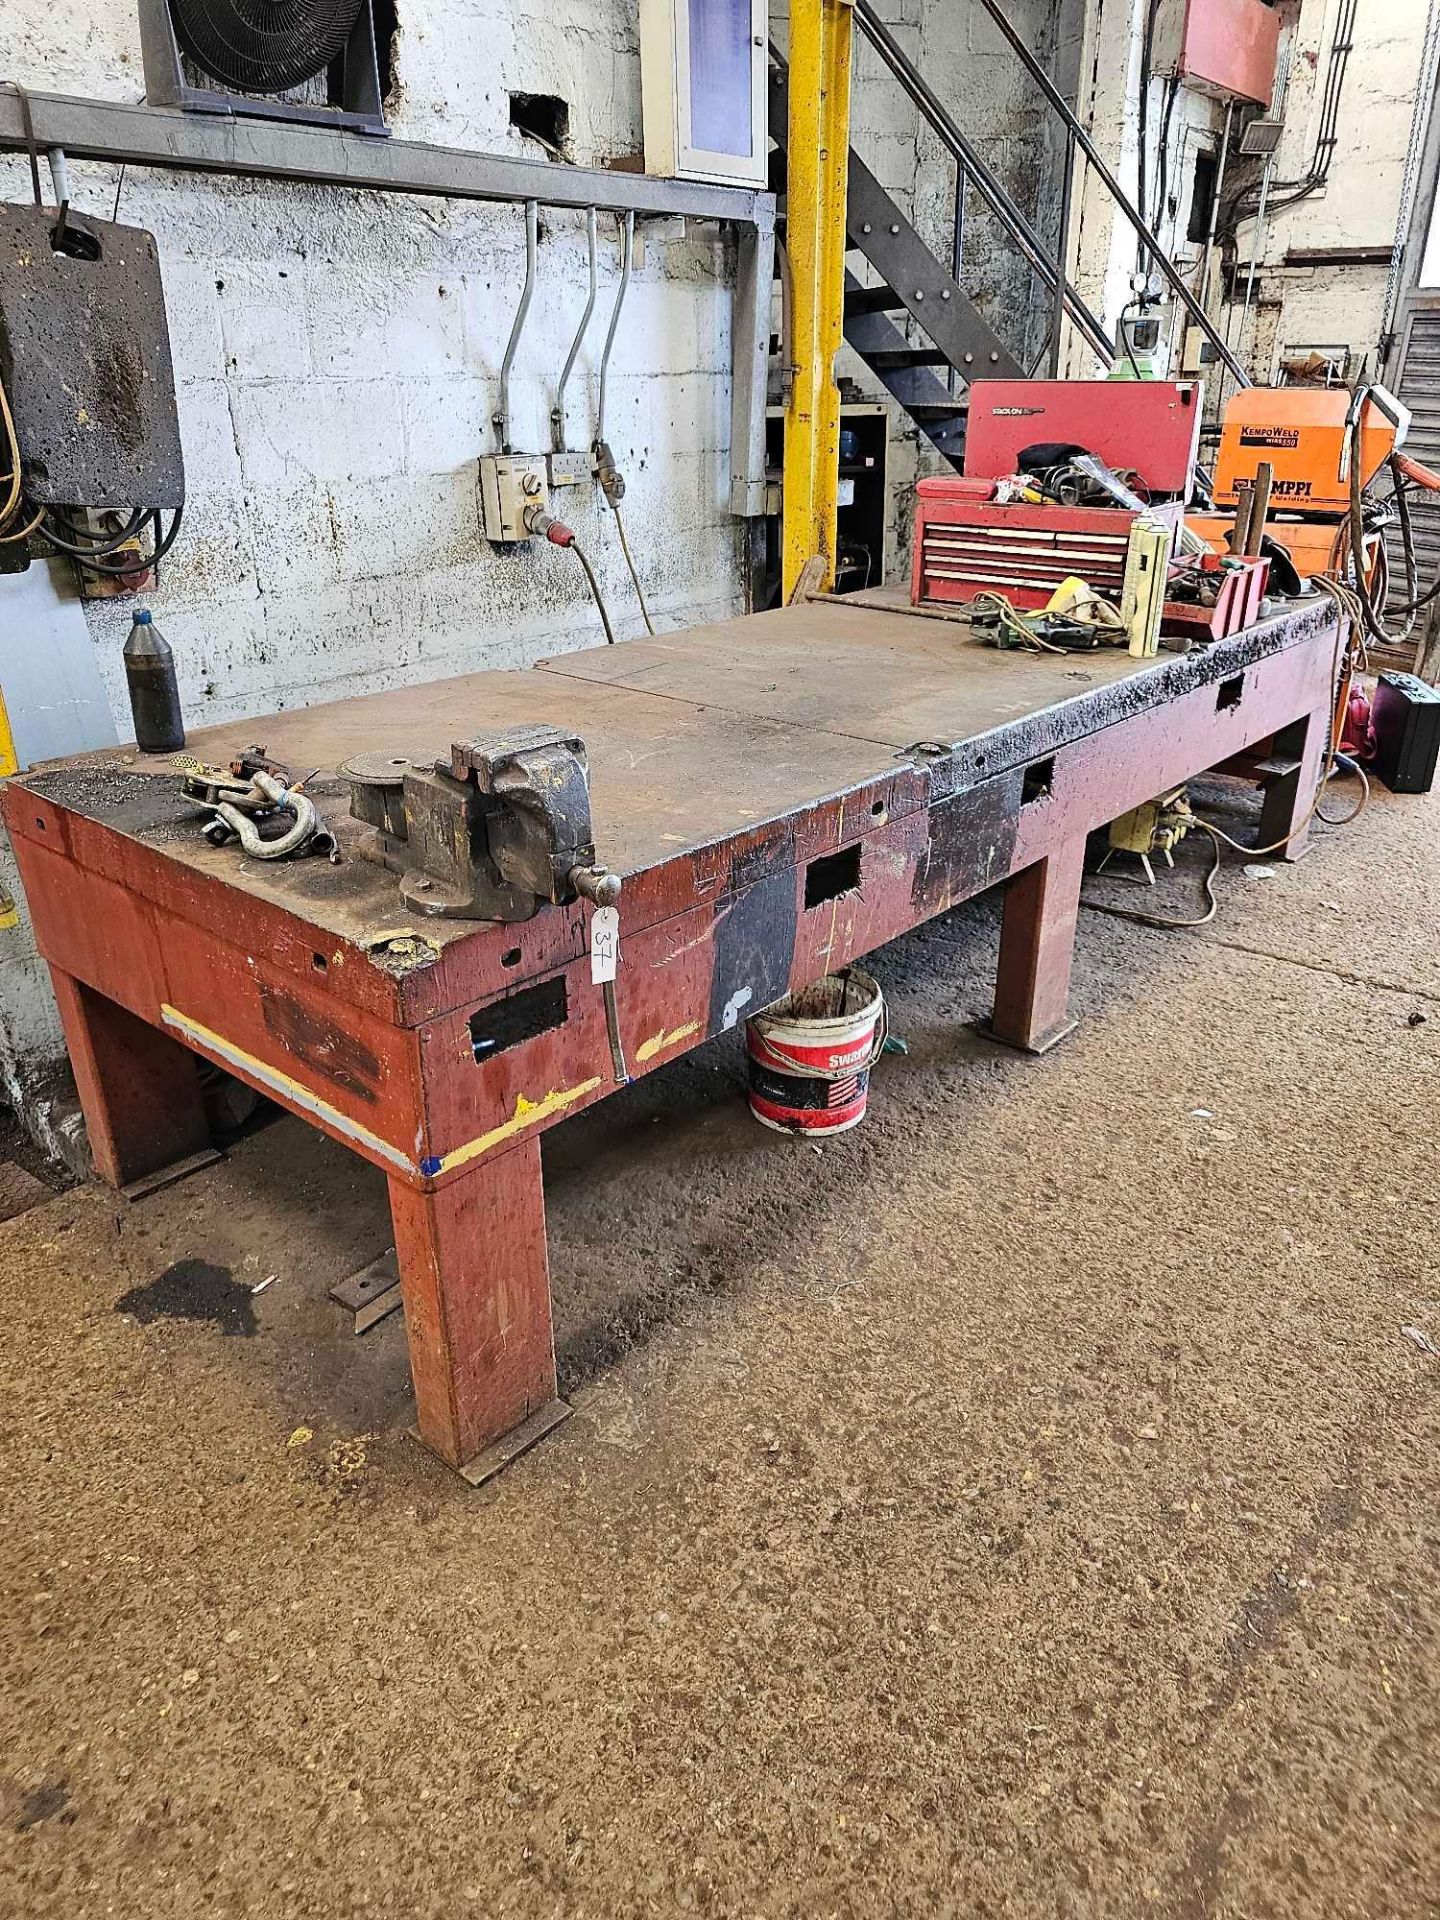 Cast Steel Engineers Marking Out Work Bench 370 x 125 x 88cm Weight 2000kg - Image 4 of 4